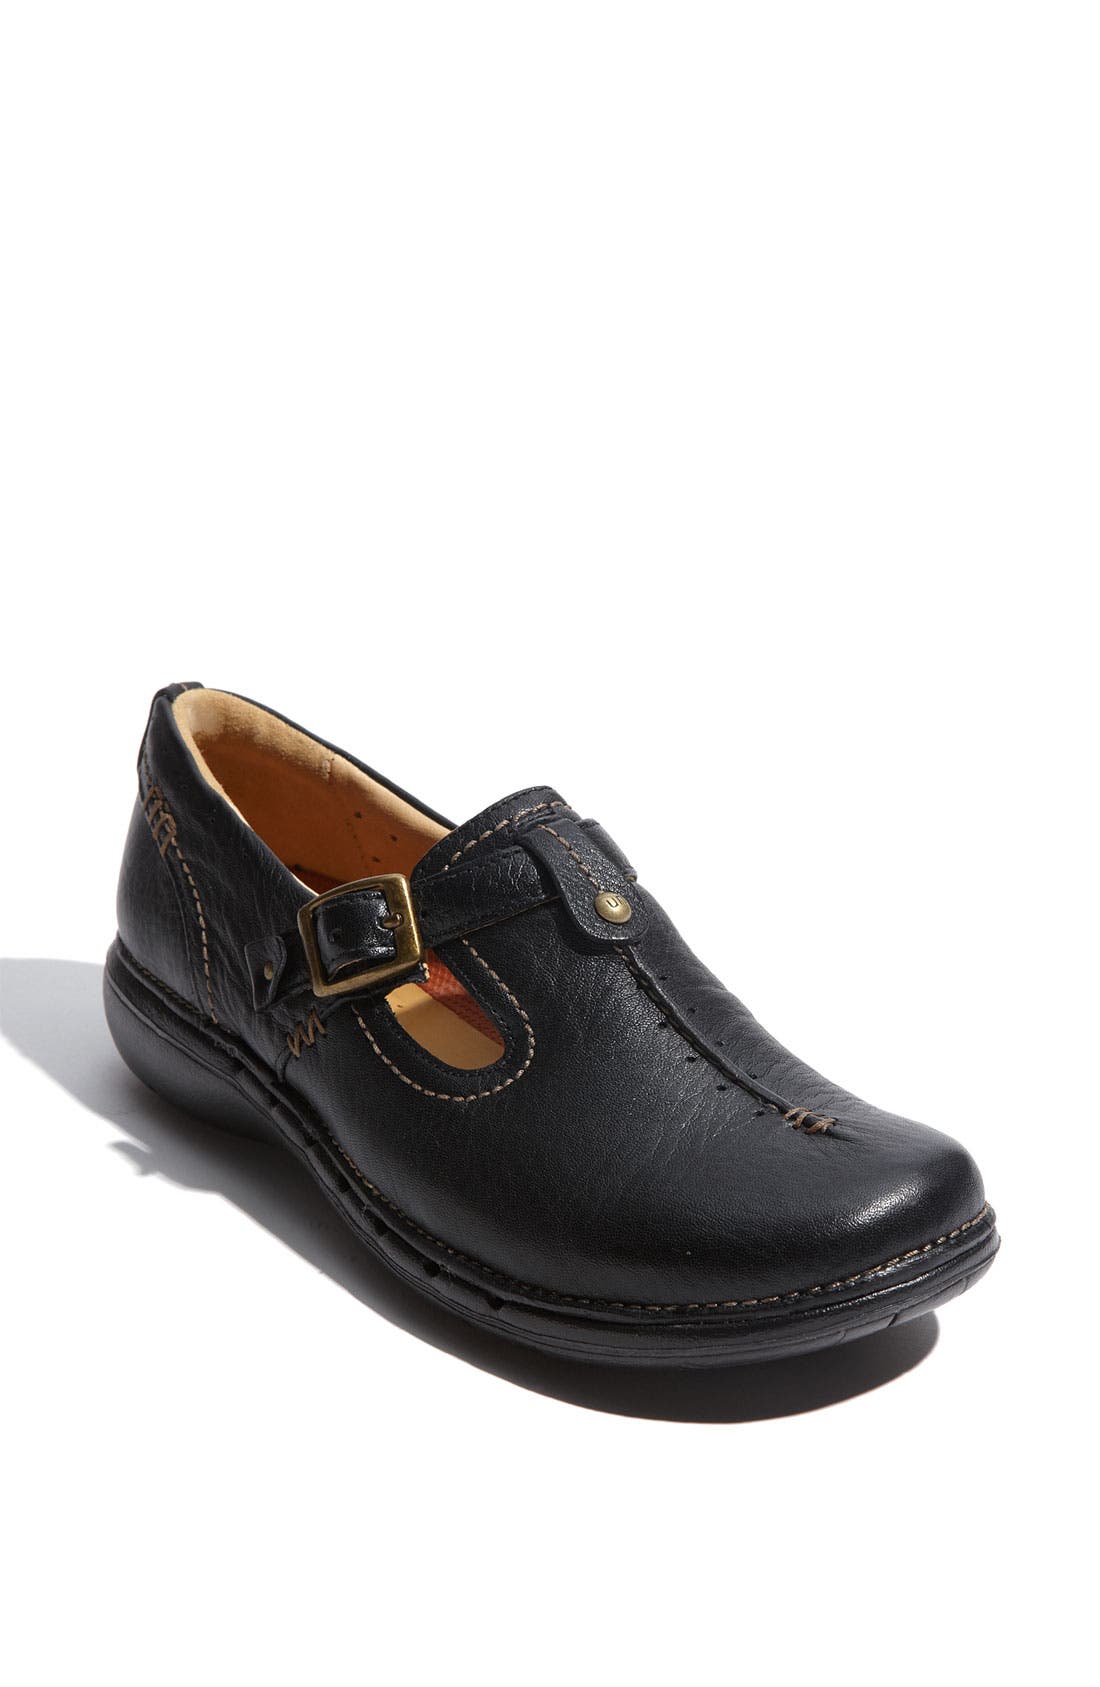 clarks unstructured shoes mary jane